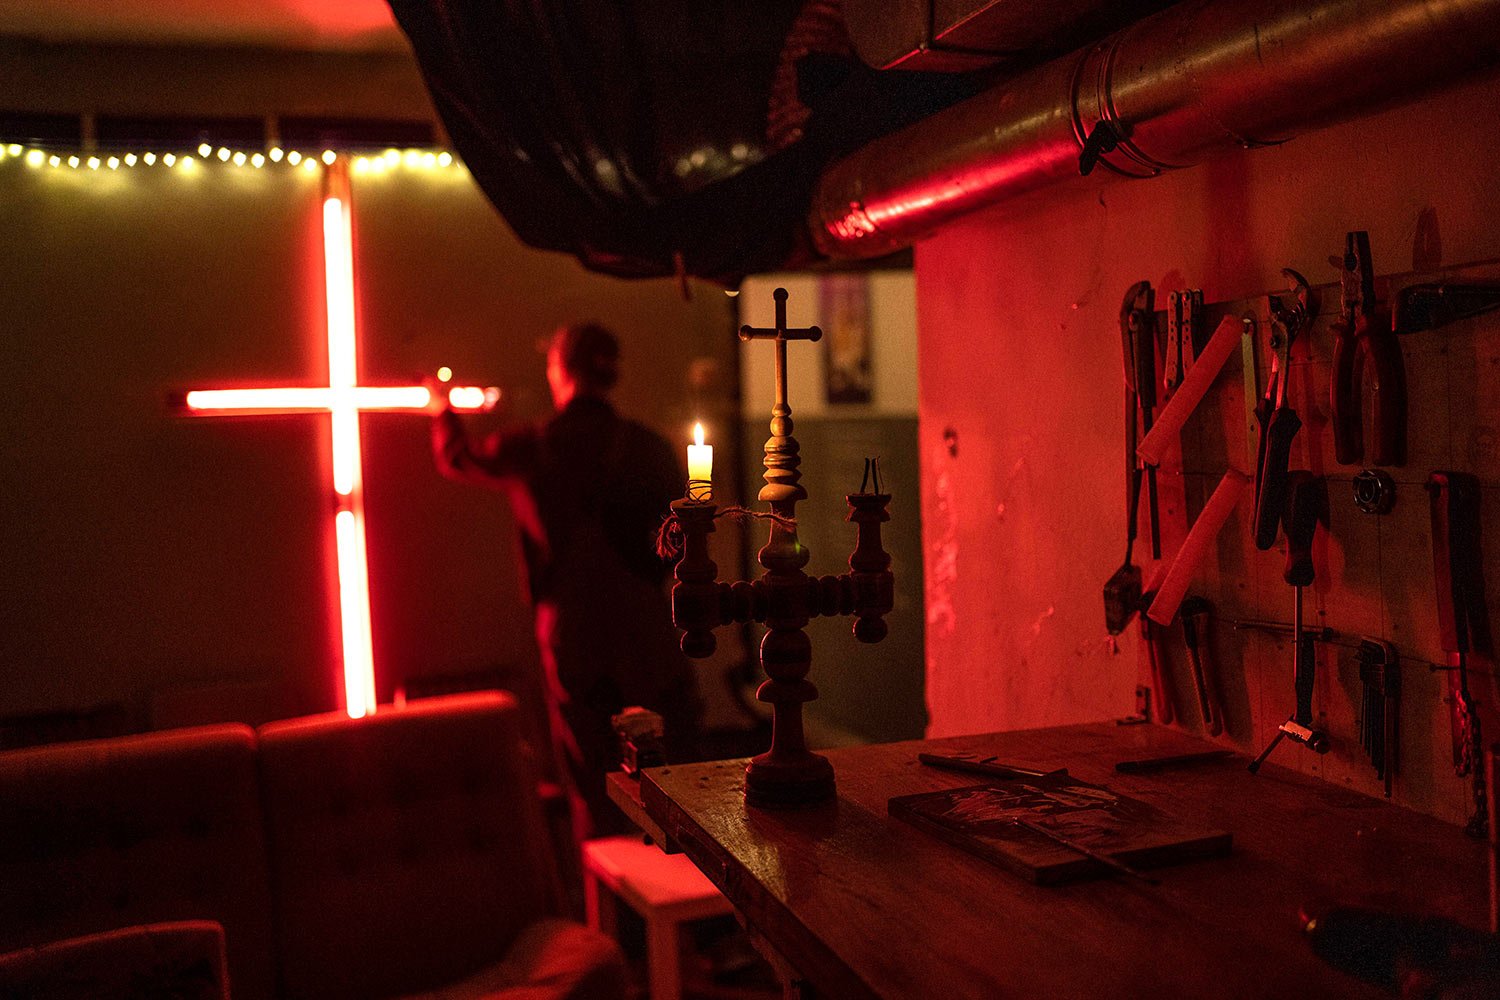  A man lights a candle in an artist's co-living studio space that is used as a bomb shelter and a place to help the Territorial Defense Units, in Kyiv, Ukraine, Wednesday, March 23, 2022. (AP Photo/Rodrigo Abd) 